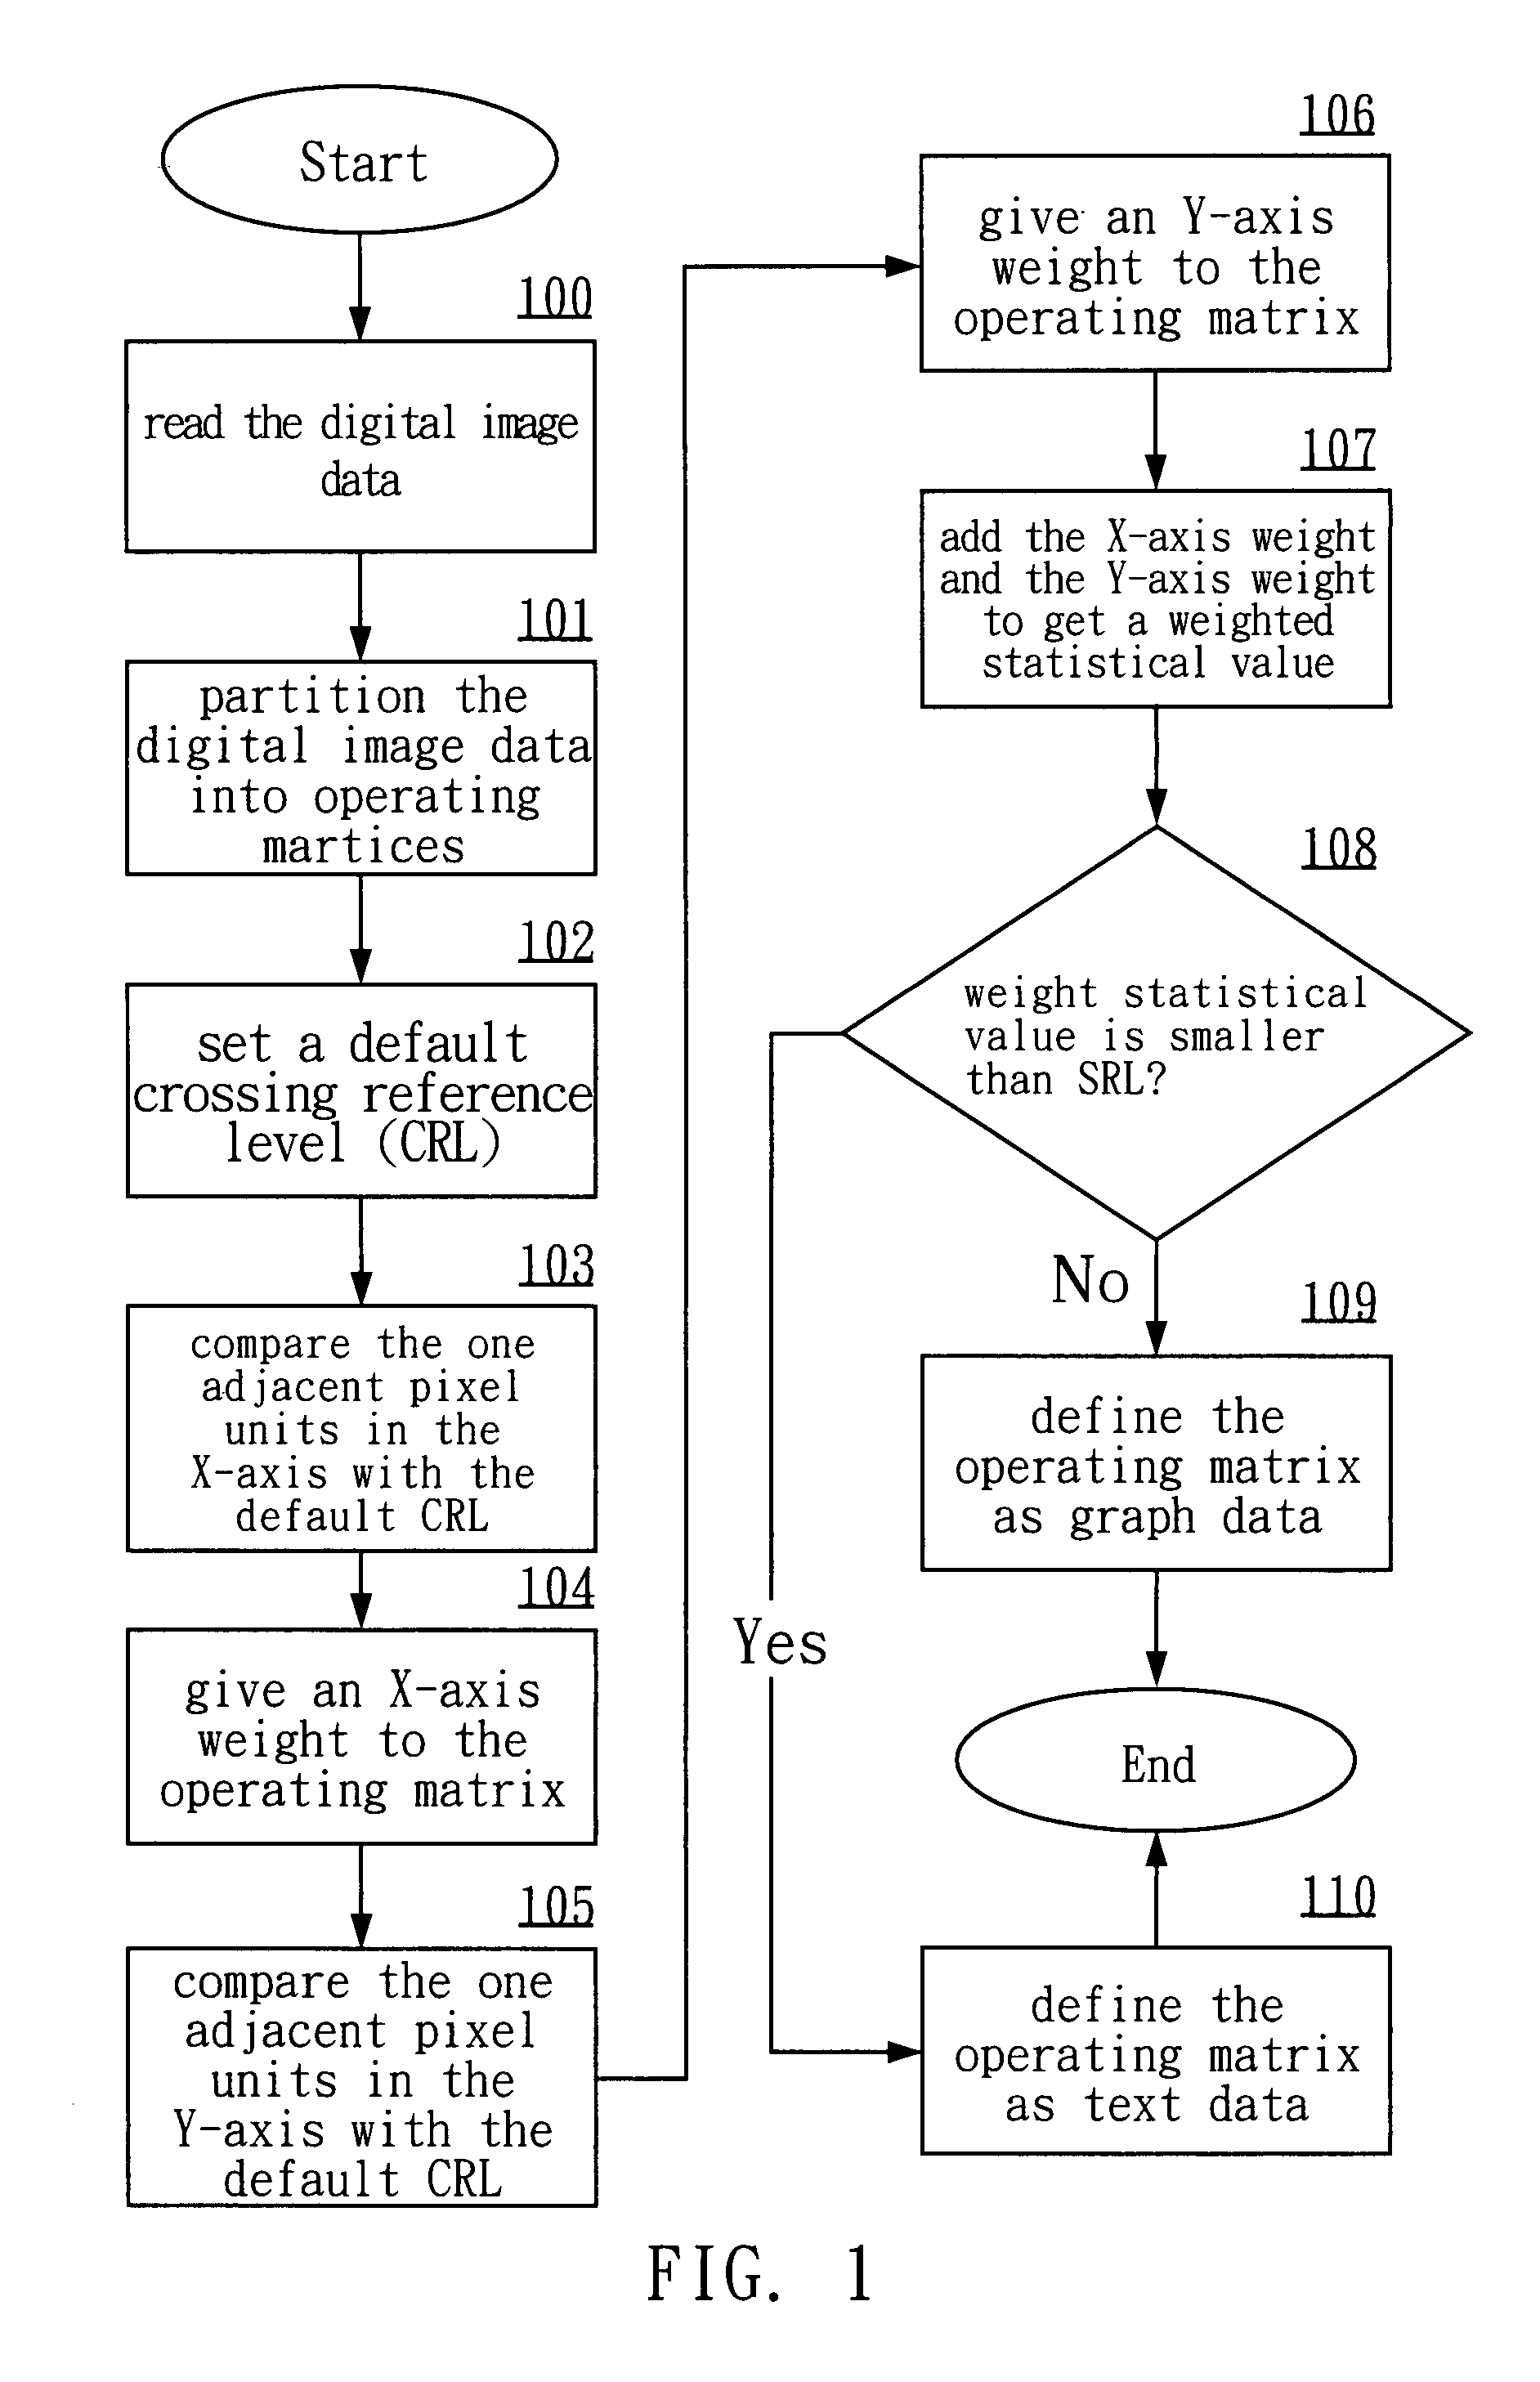 Method of separating text and graphs in digital image data